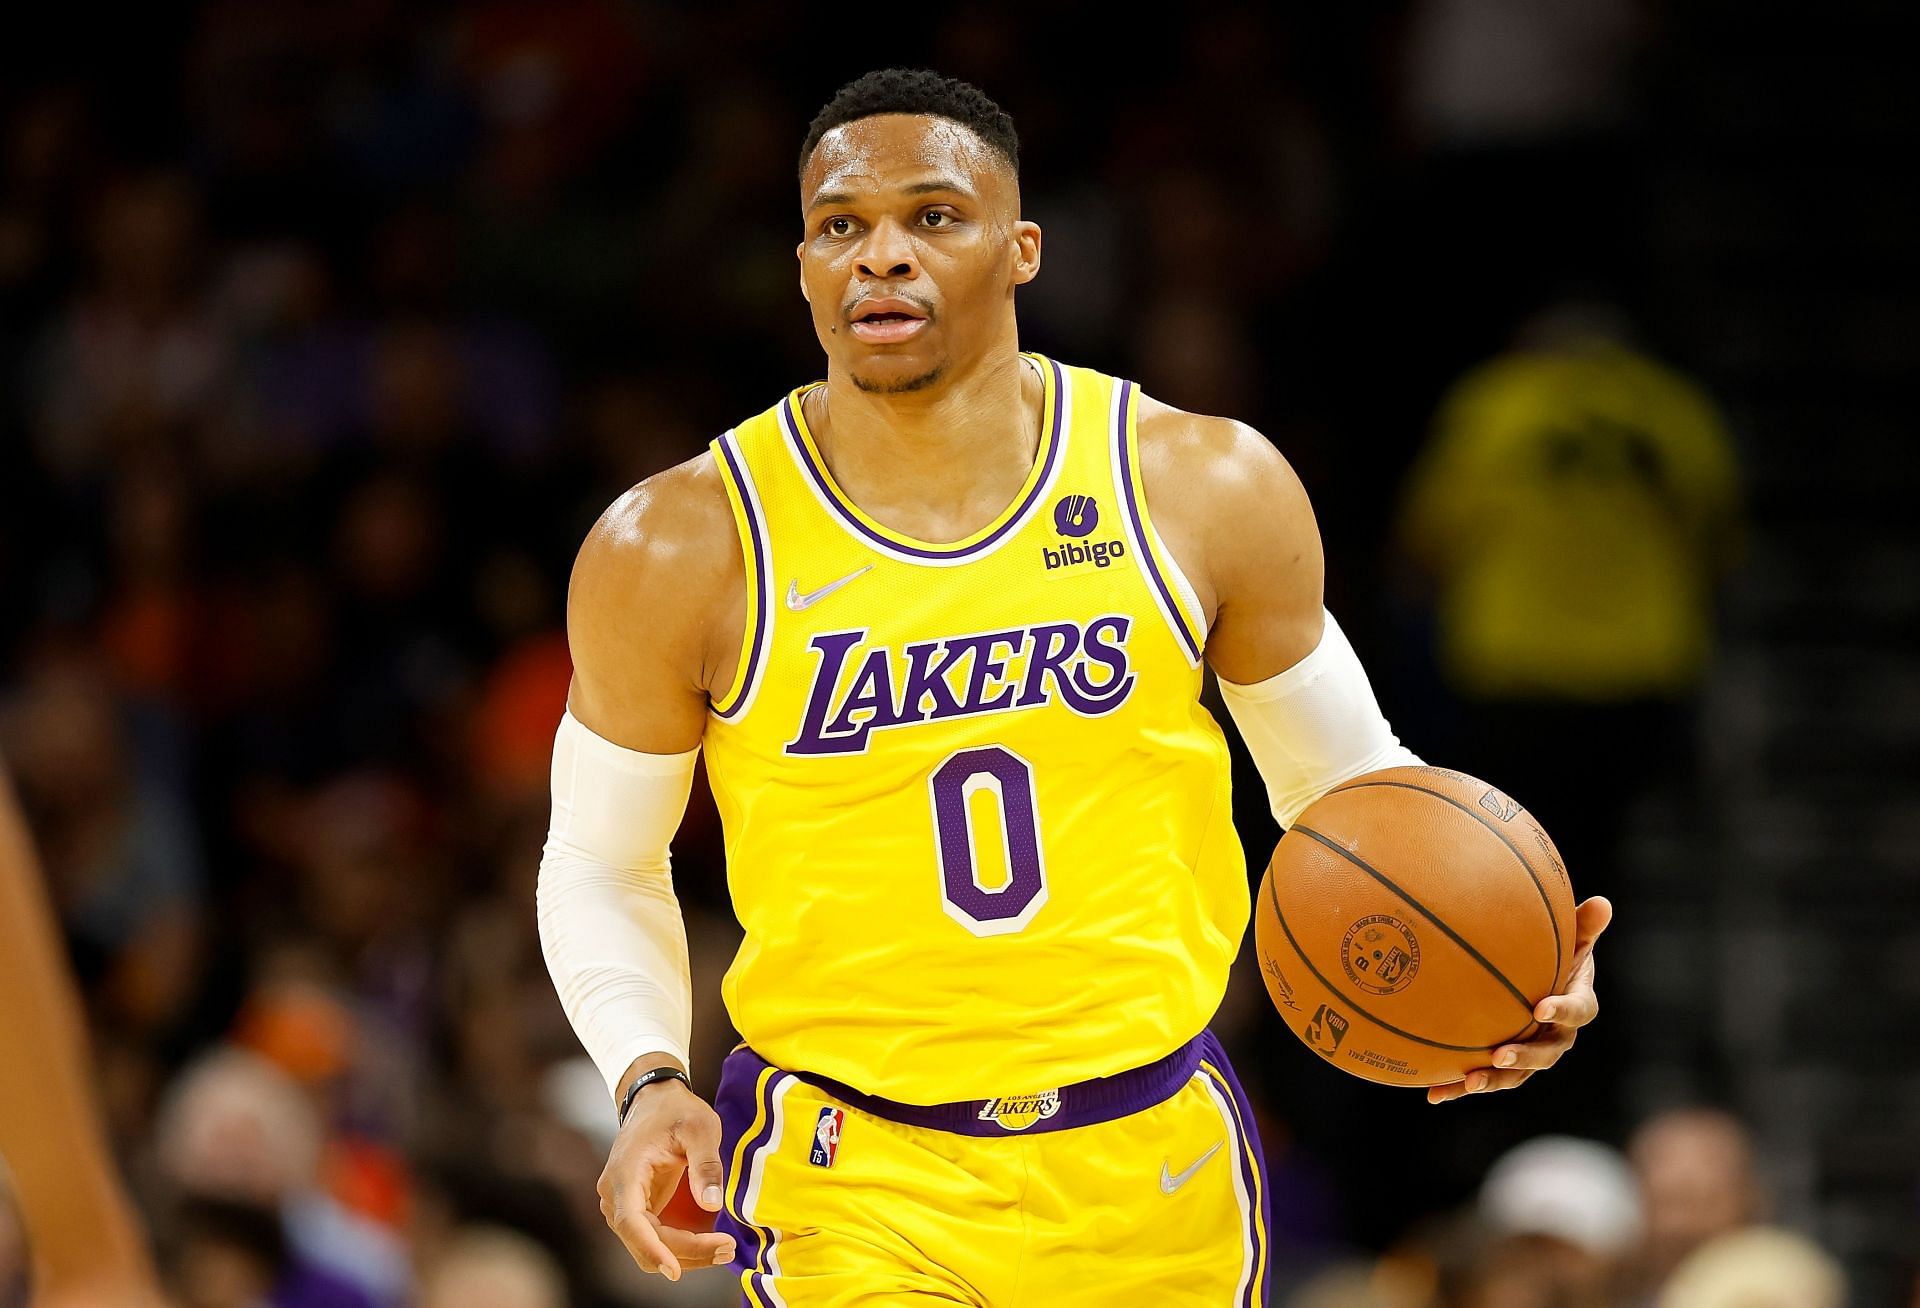 Russell Westbrook No. 0 of the LA Lakers.